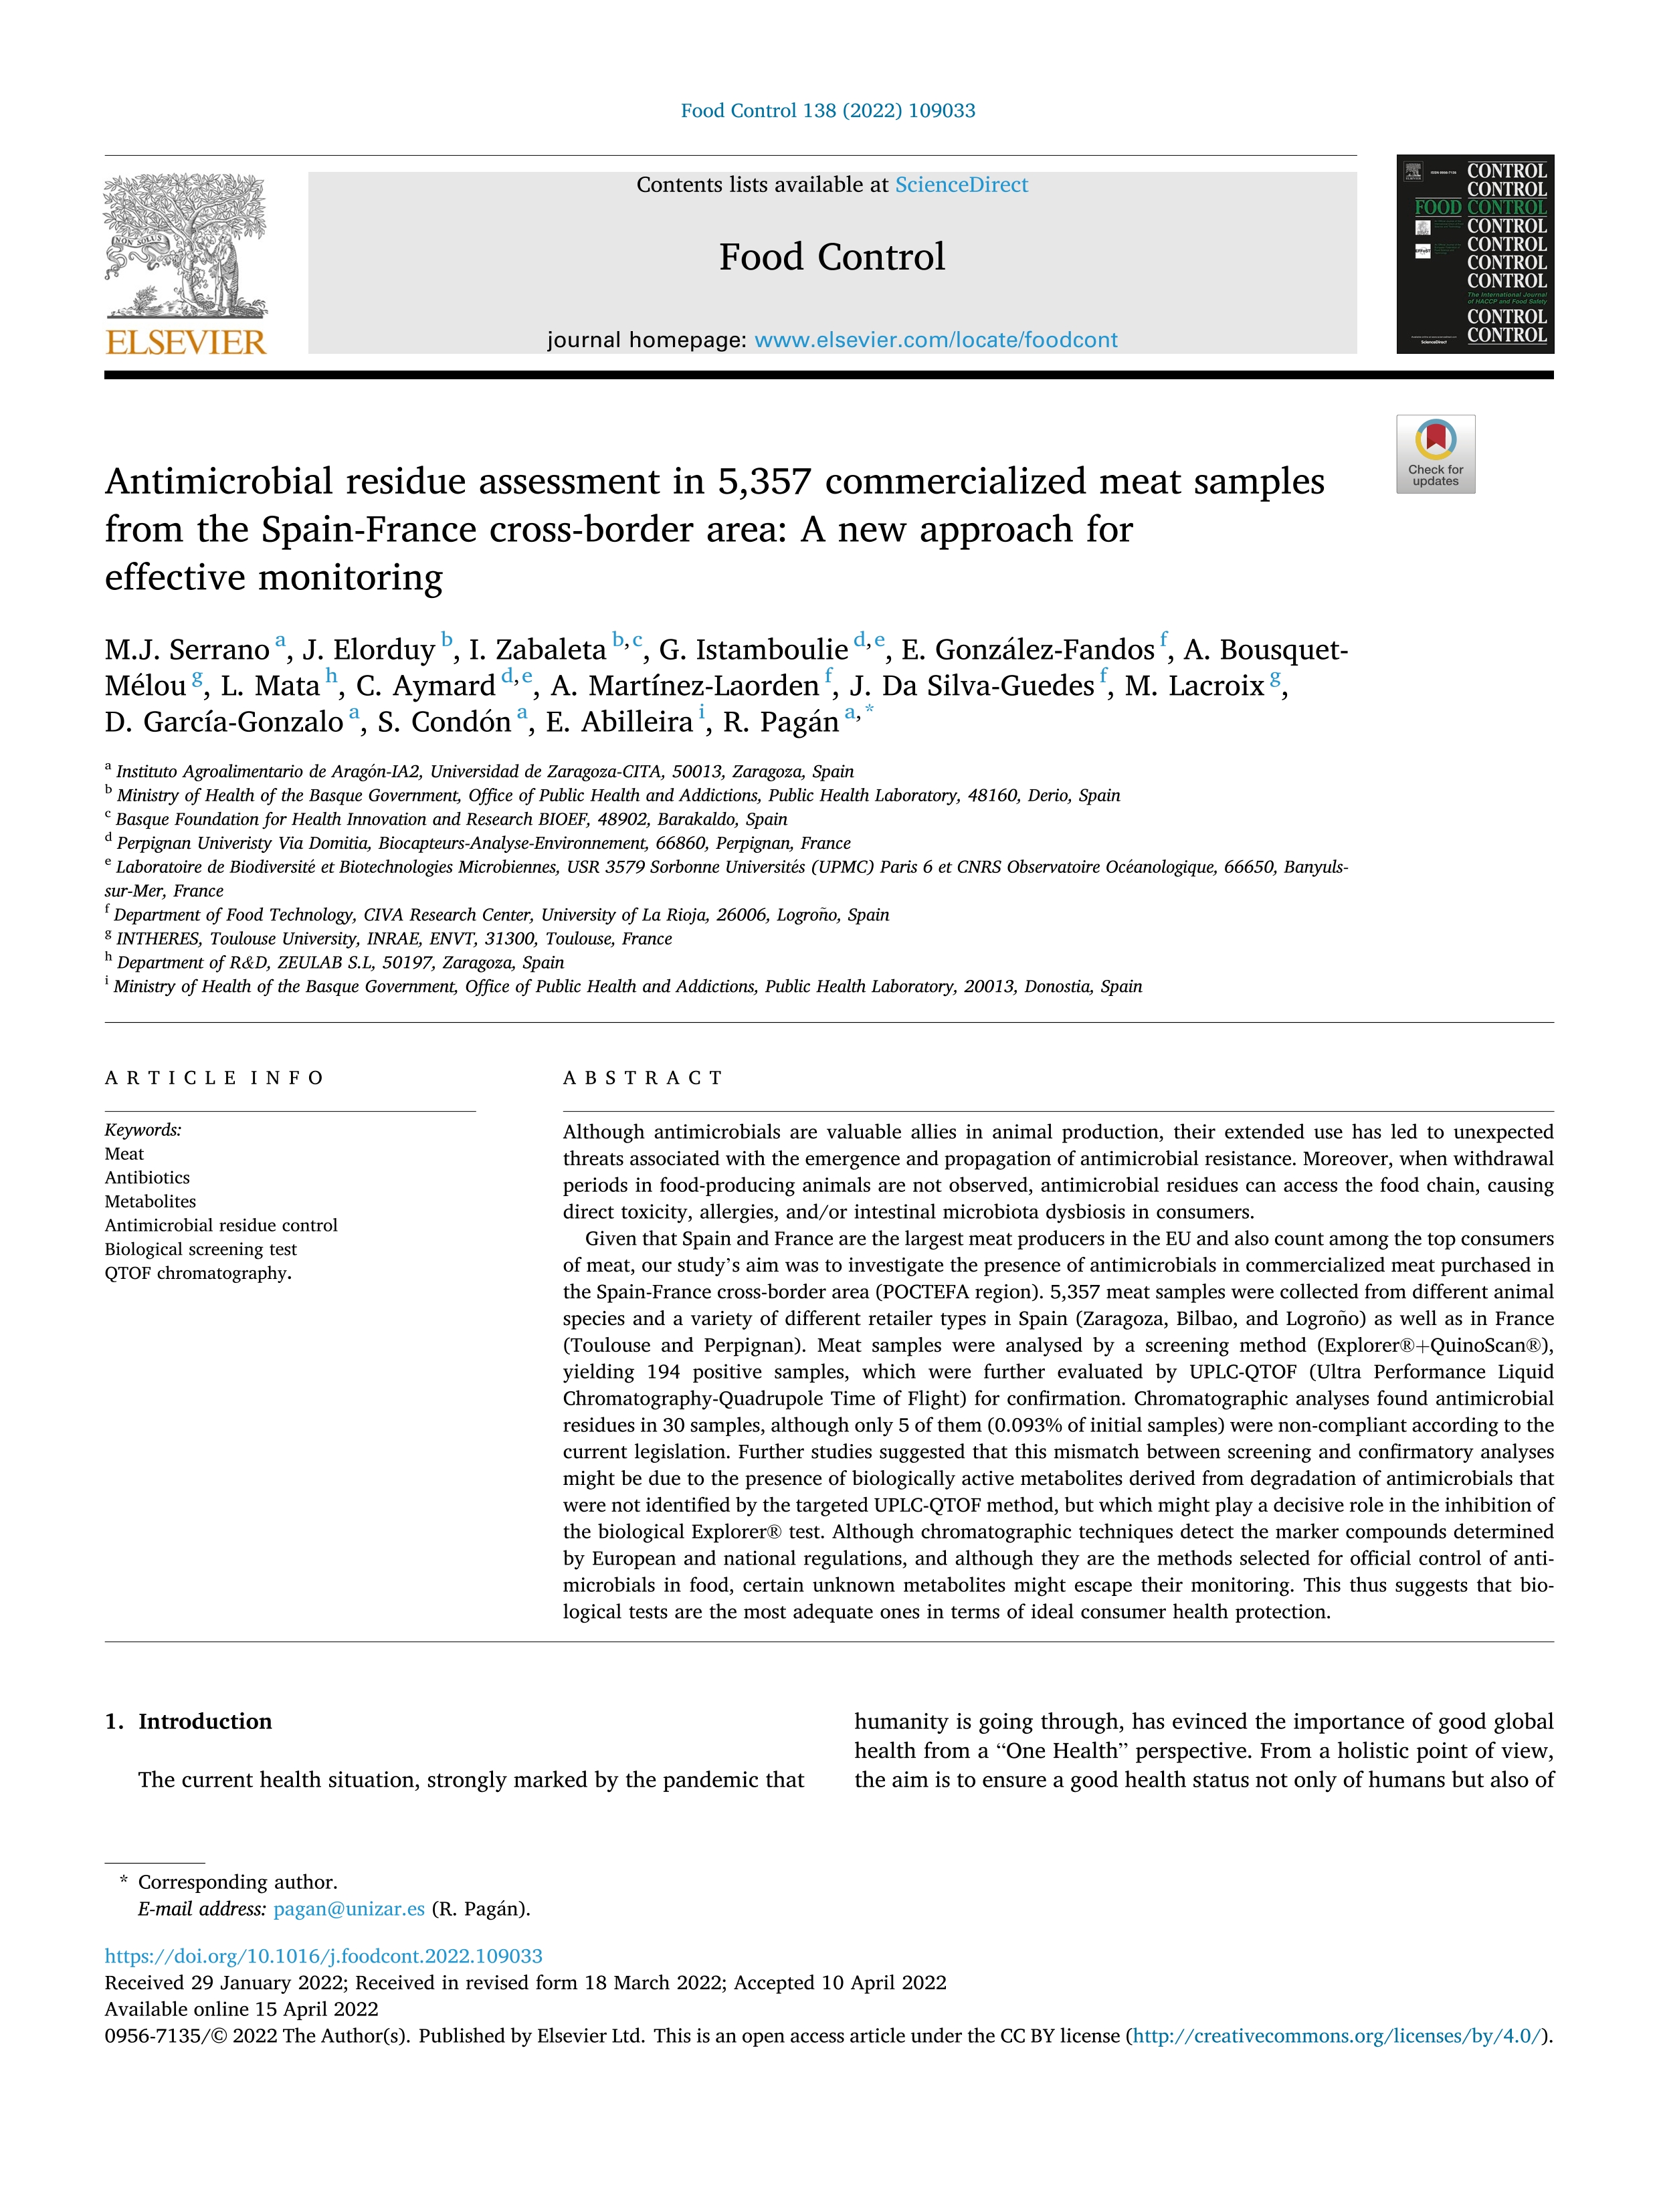 Antimicrobial residue assessment in 5, 357 commercialized meat samples from the Spain-France cross-border area: A new approach for effective monitoring